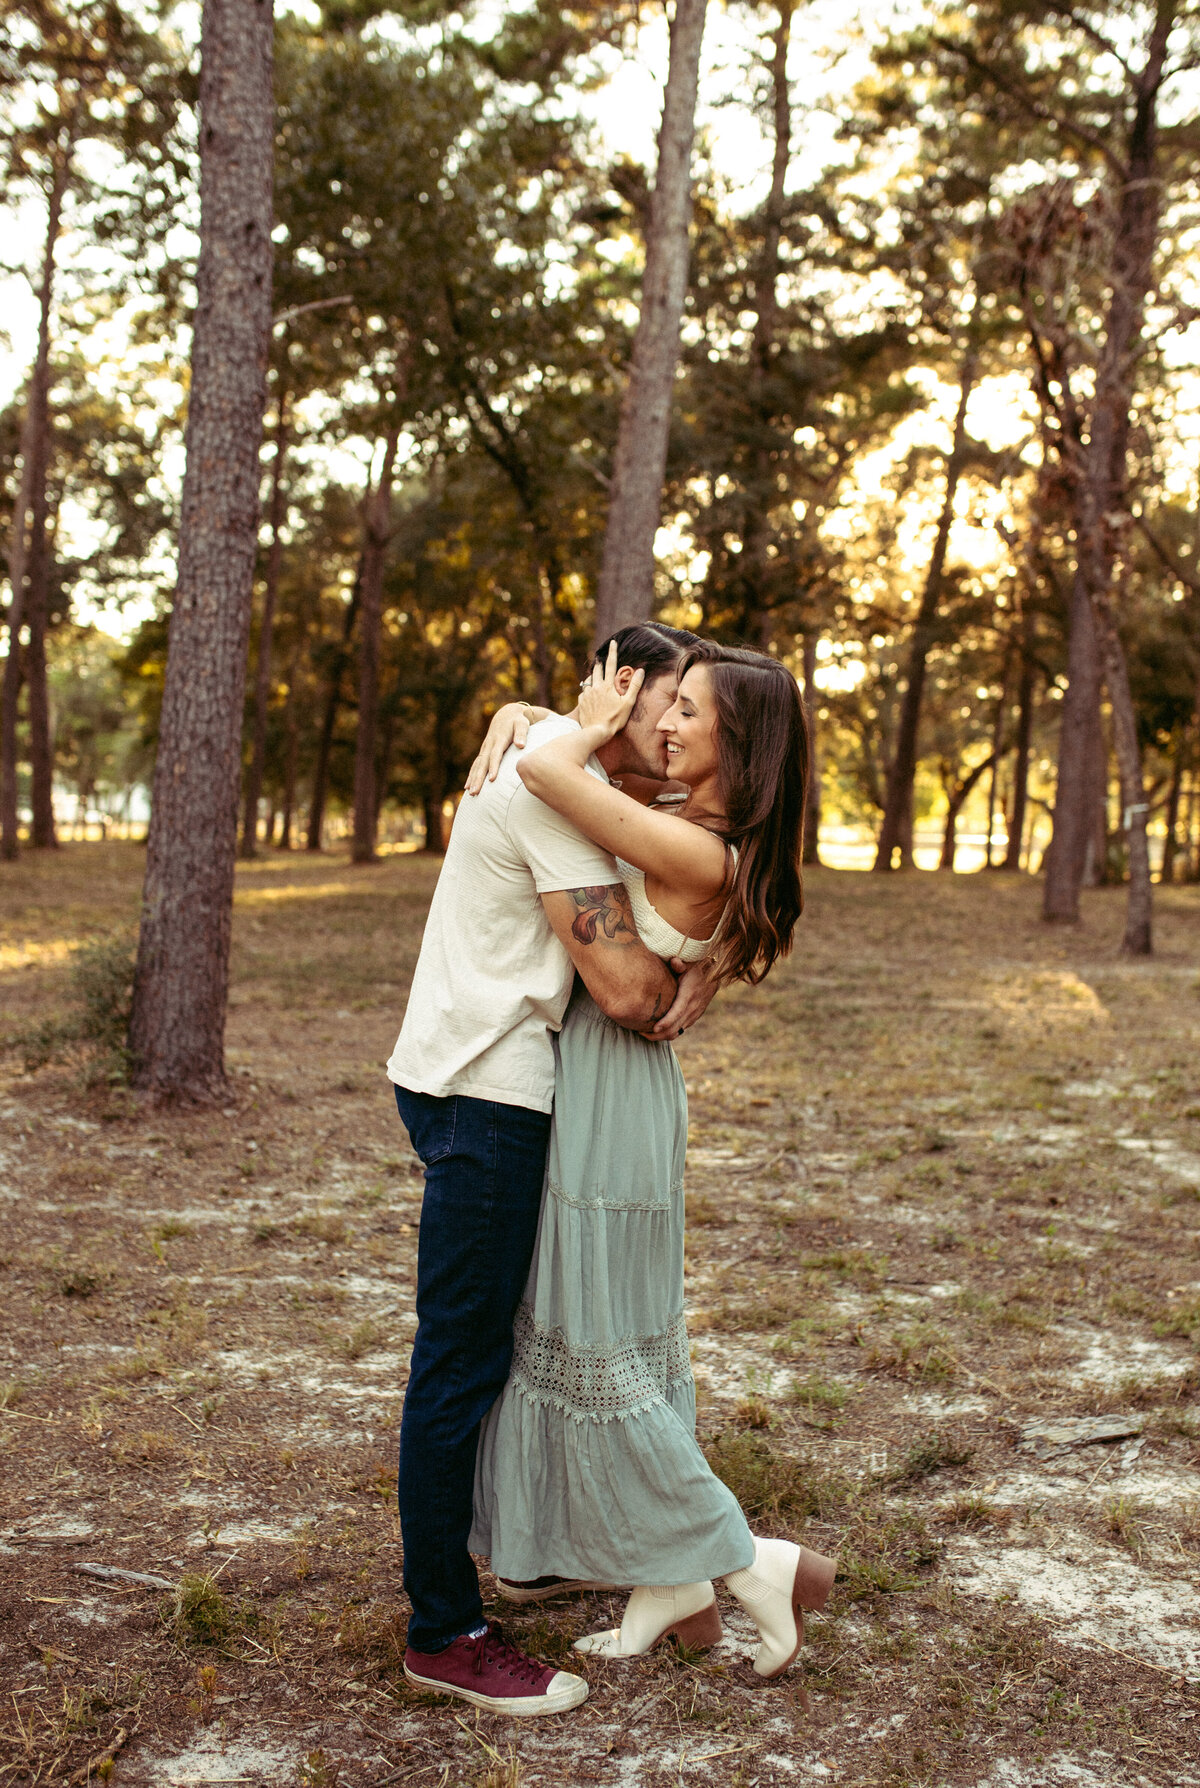 married couple embrace and dance at sunset under trees